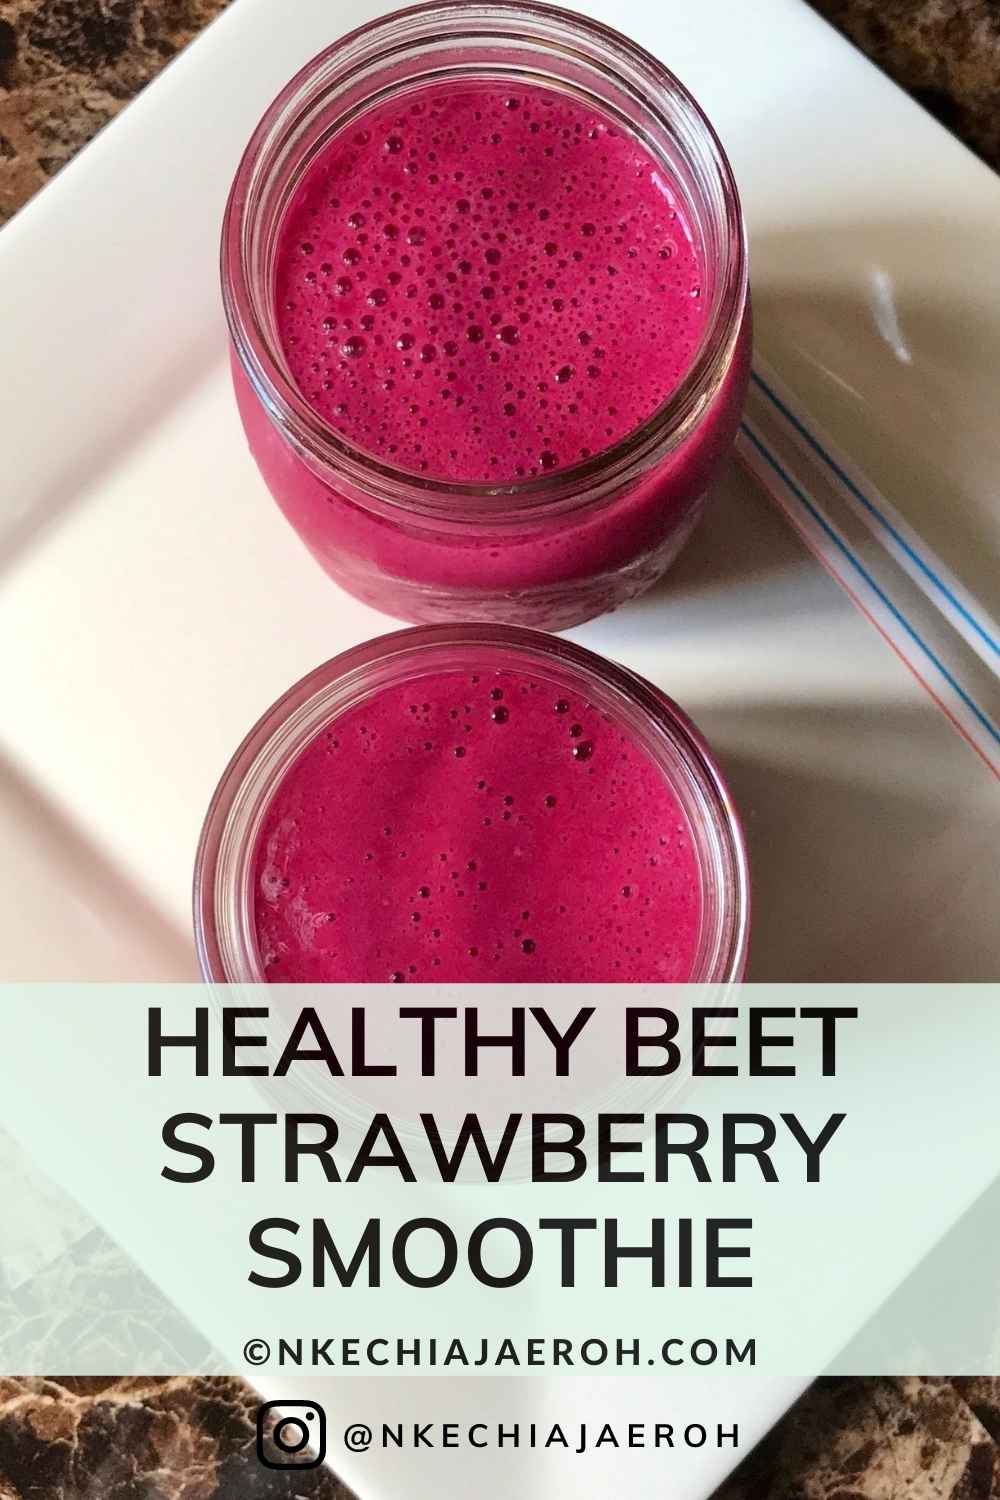 Healthy and Delicious Beet and Strawberry Smoothie Recipe. This nutritious beet strawberry smoothie is a must-try! This is because this smoothie is immune-boosting, health-improving, nourishing, and easy to make! Fortunately, this immune-boosting red beet strawberry smoothie requires only five-ingredients - beetroot, strawberries, yogurt, freshly squeezed orange juice, yogurt, and banana. This healthy smoothie recipe is an excellent breakfast substitute. #Healthysmoothie #beetsmoothie